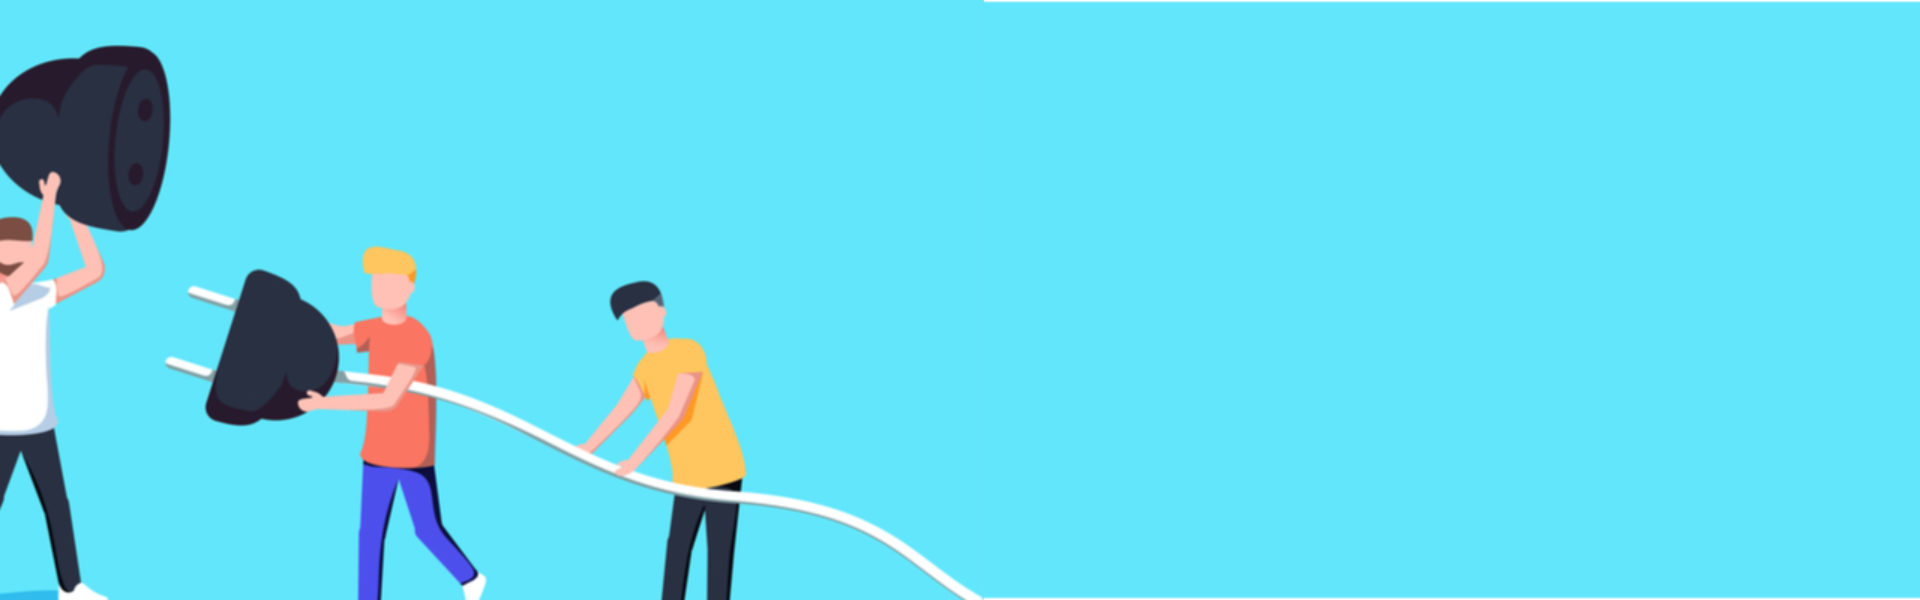 People-Carrying-Disconnected-Cord-Banner-1920x600